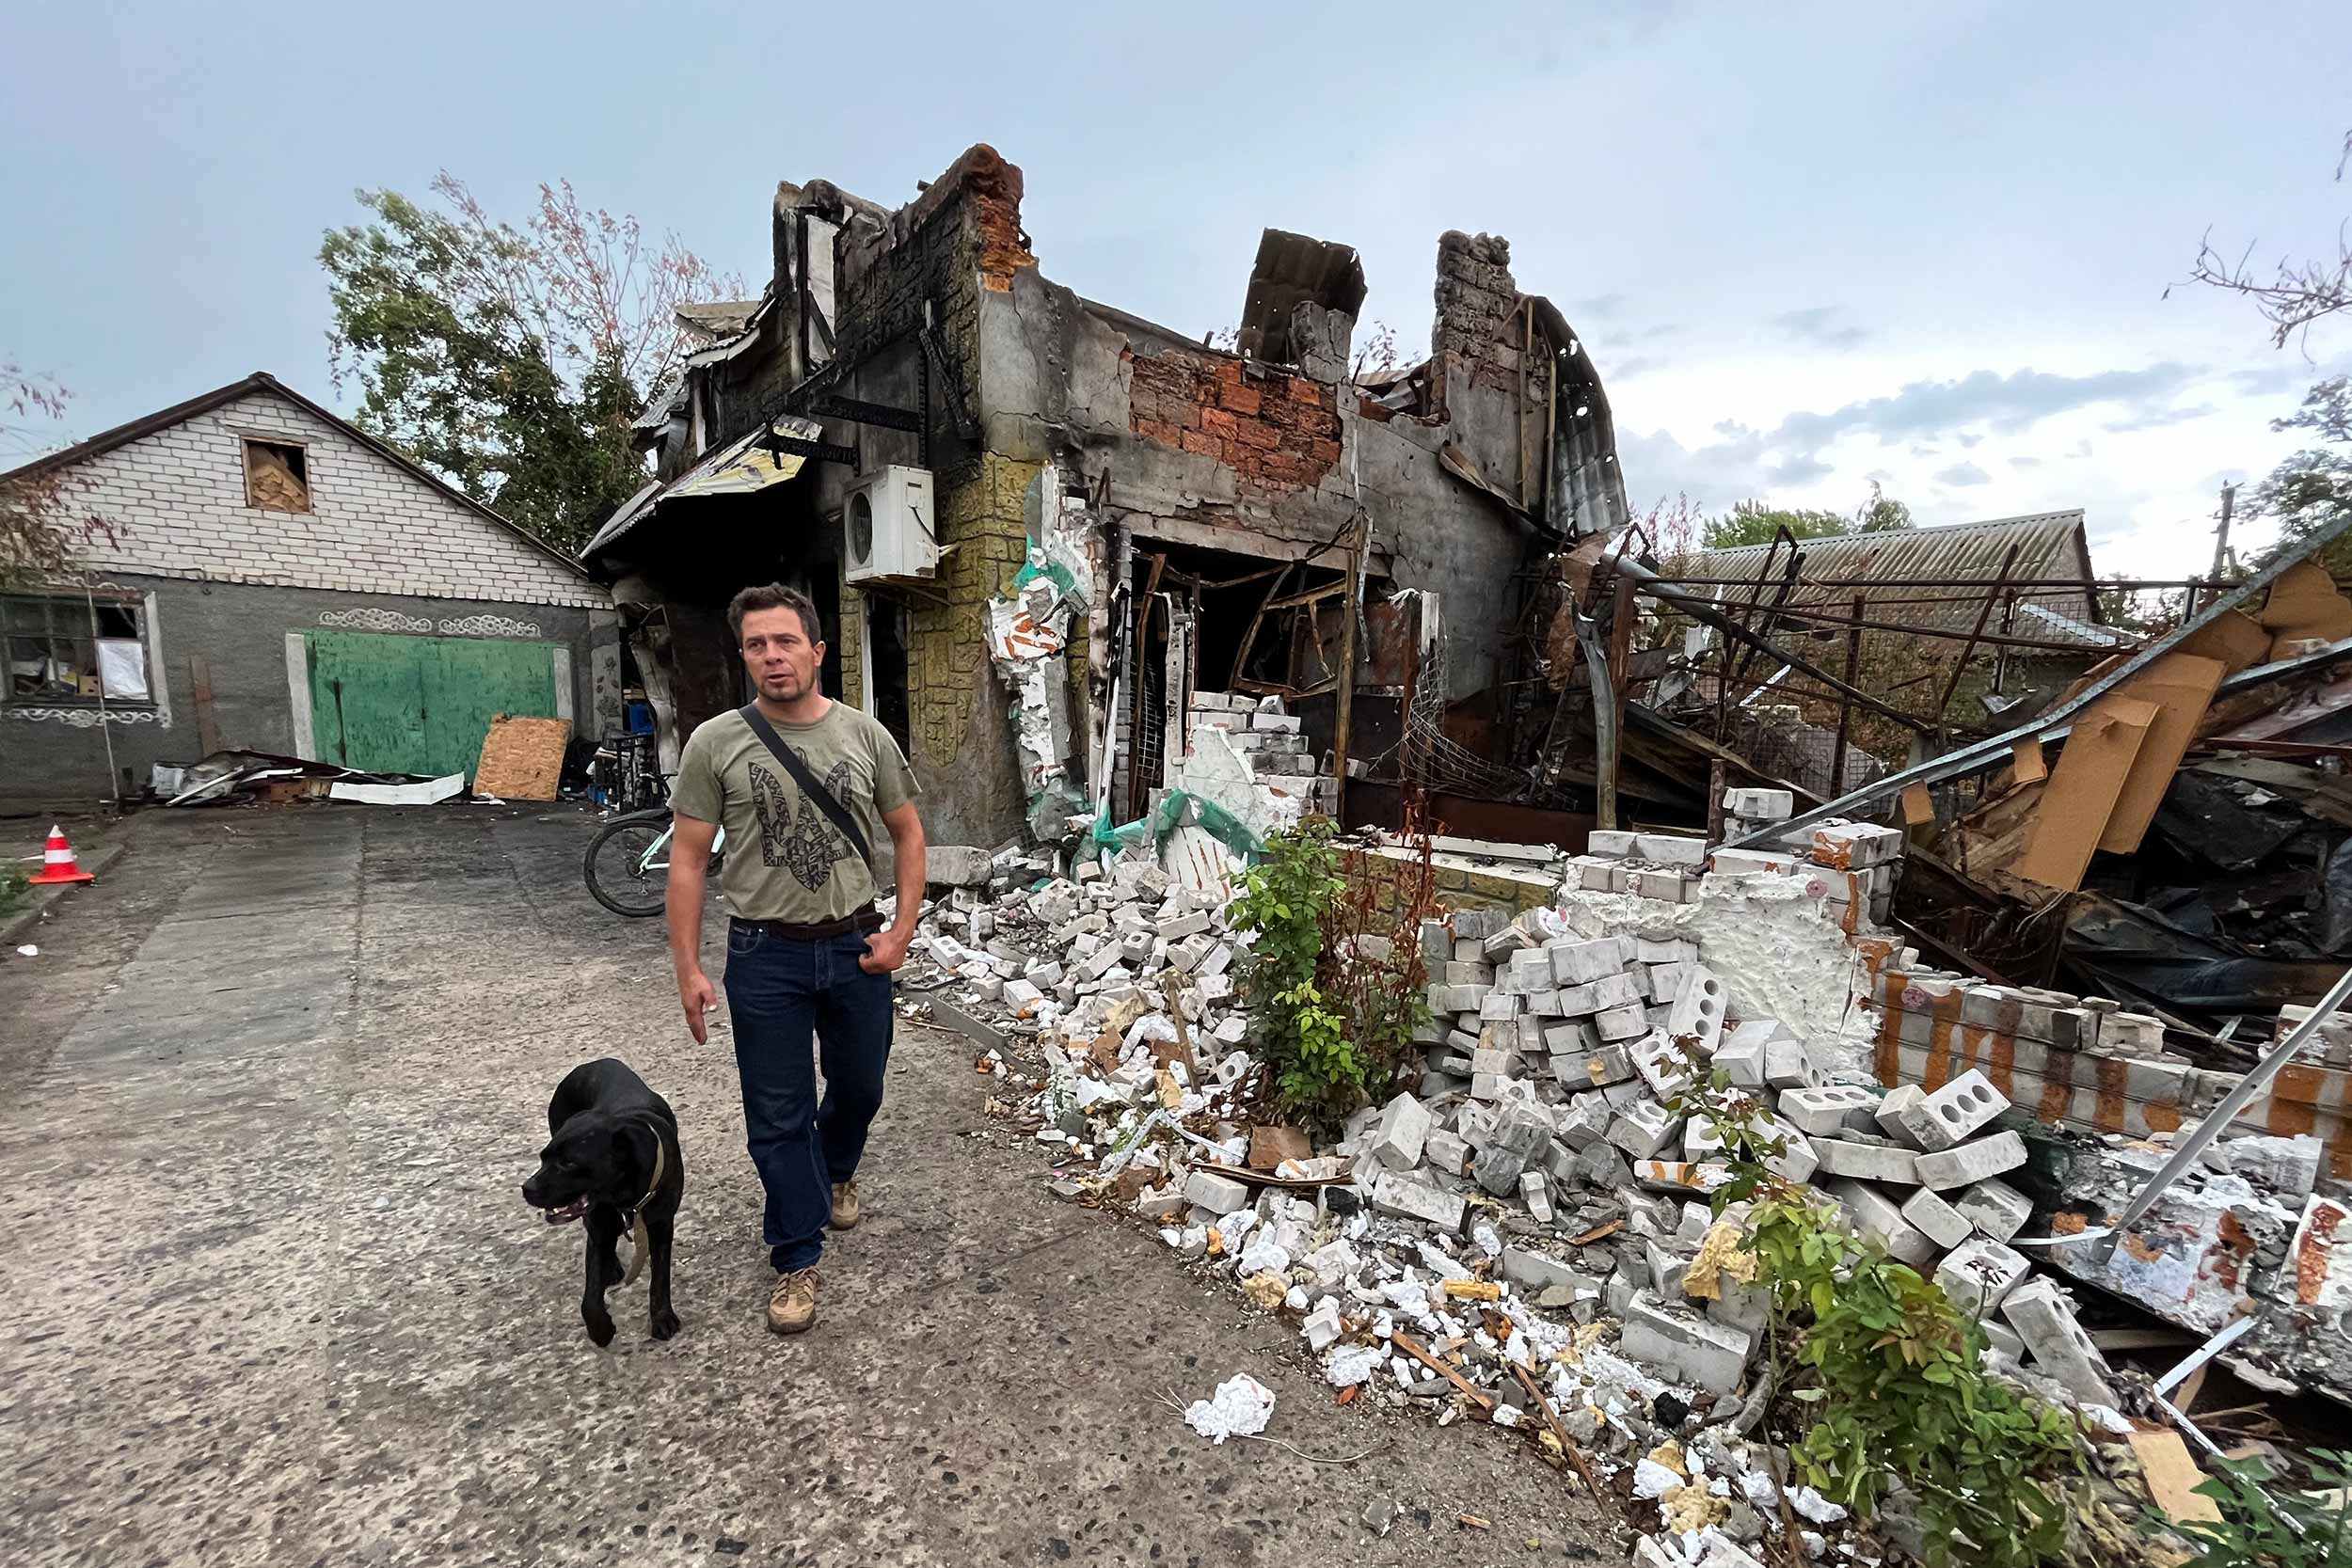 Olexander Pryhodko stands in front of his village shop, in Kotlyareve, outside of Mykolaiv, destroyed by Russian shelling in June. He plans to restore and re-open the store. © Anthony Borden